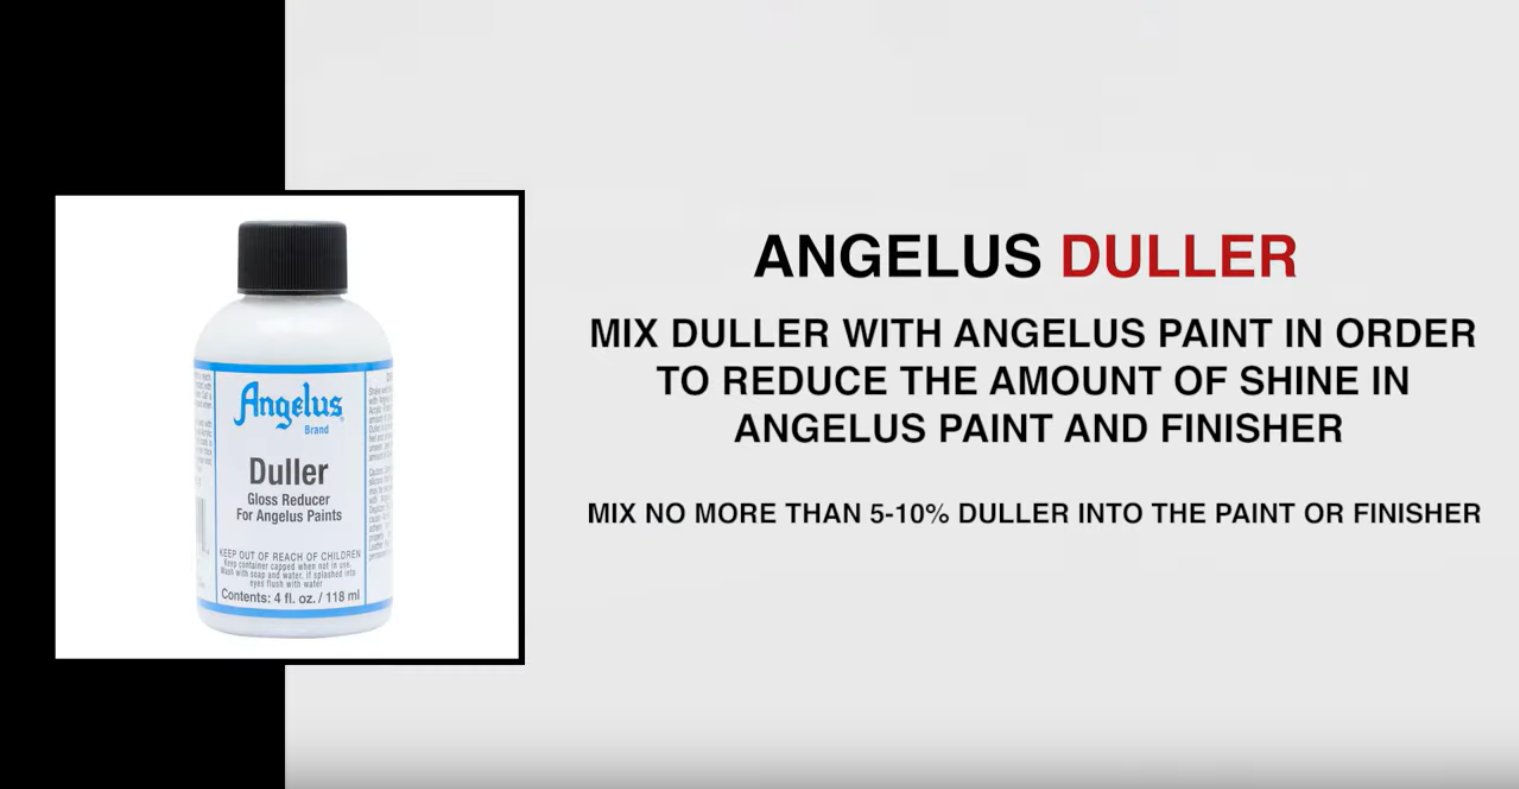 The Do's & Don'ts of Using Angelus Duller